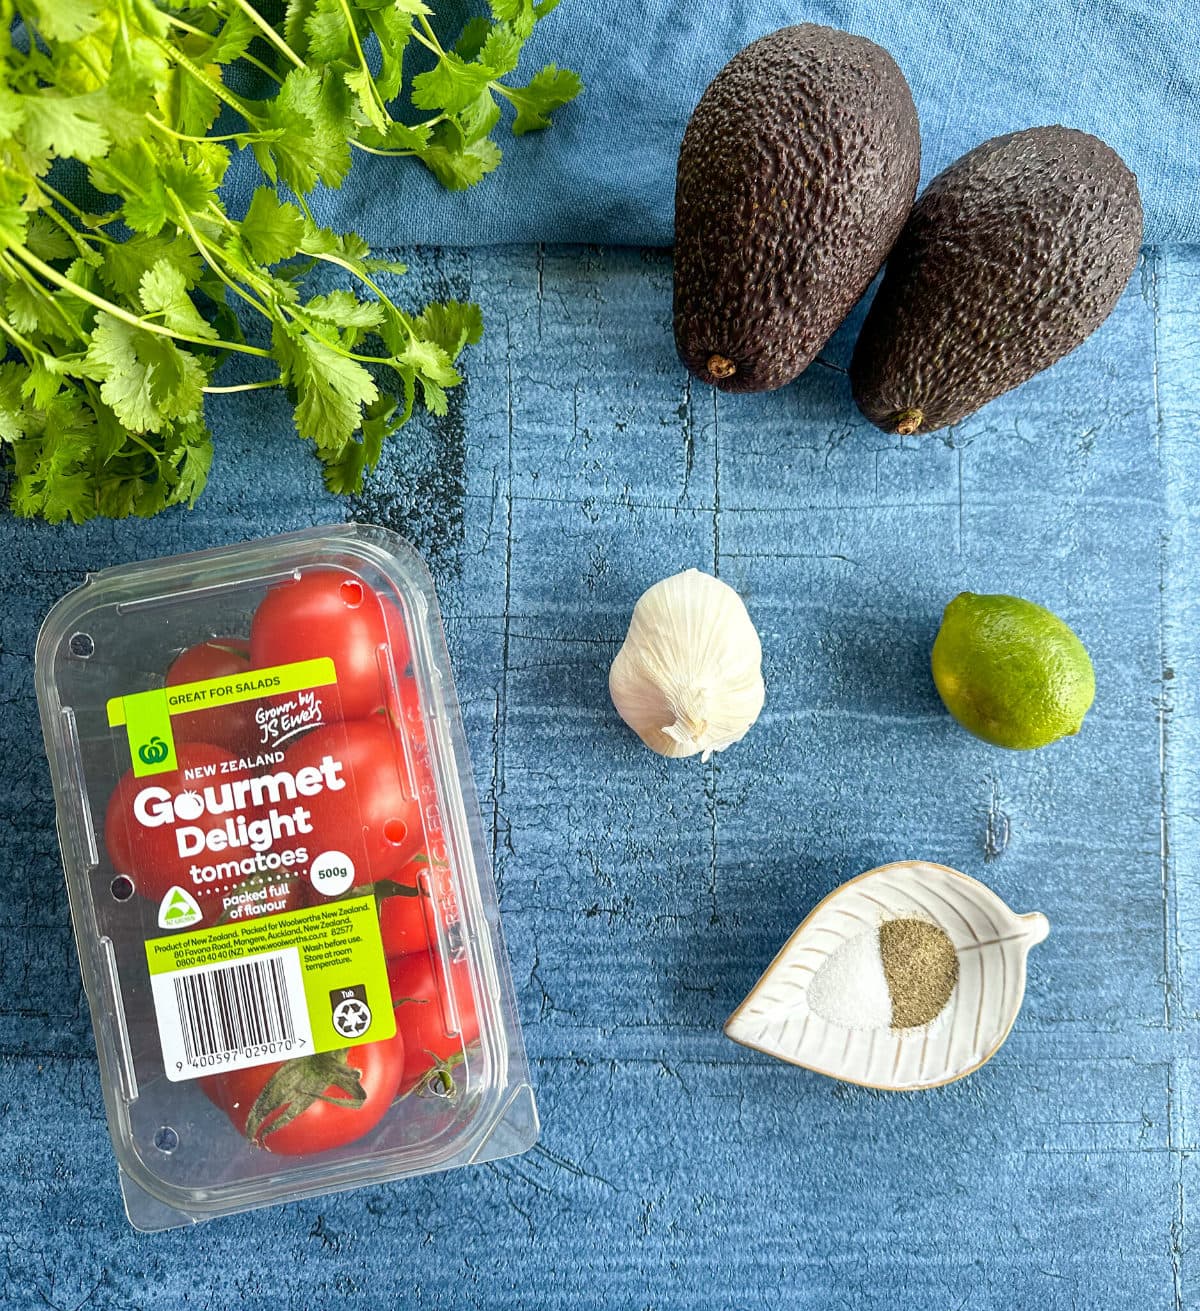 Ingredients for the best guacamole, avocadoes, tomatoes, garlic, lime juice, coriander salt and pepper